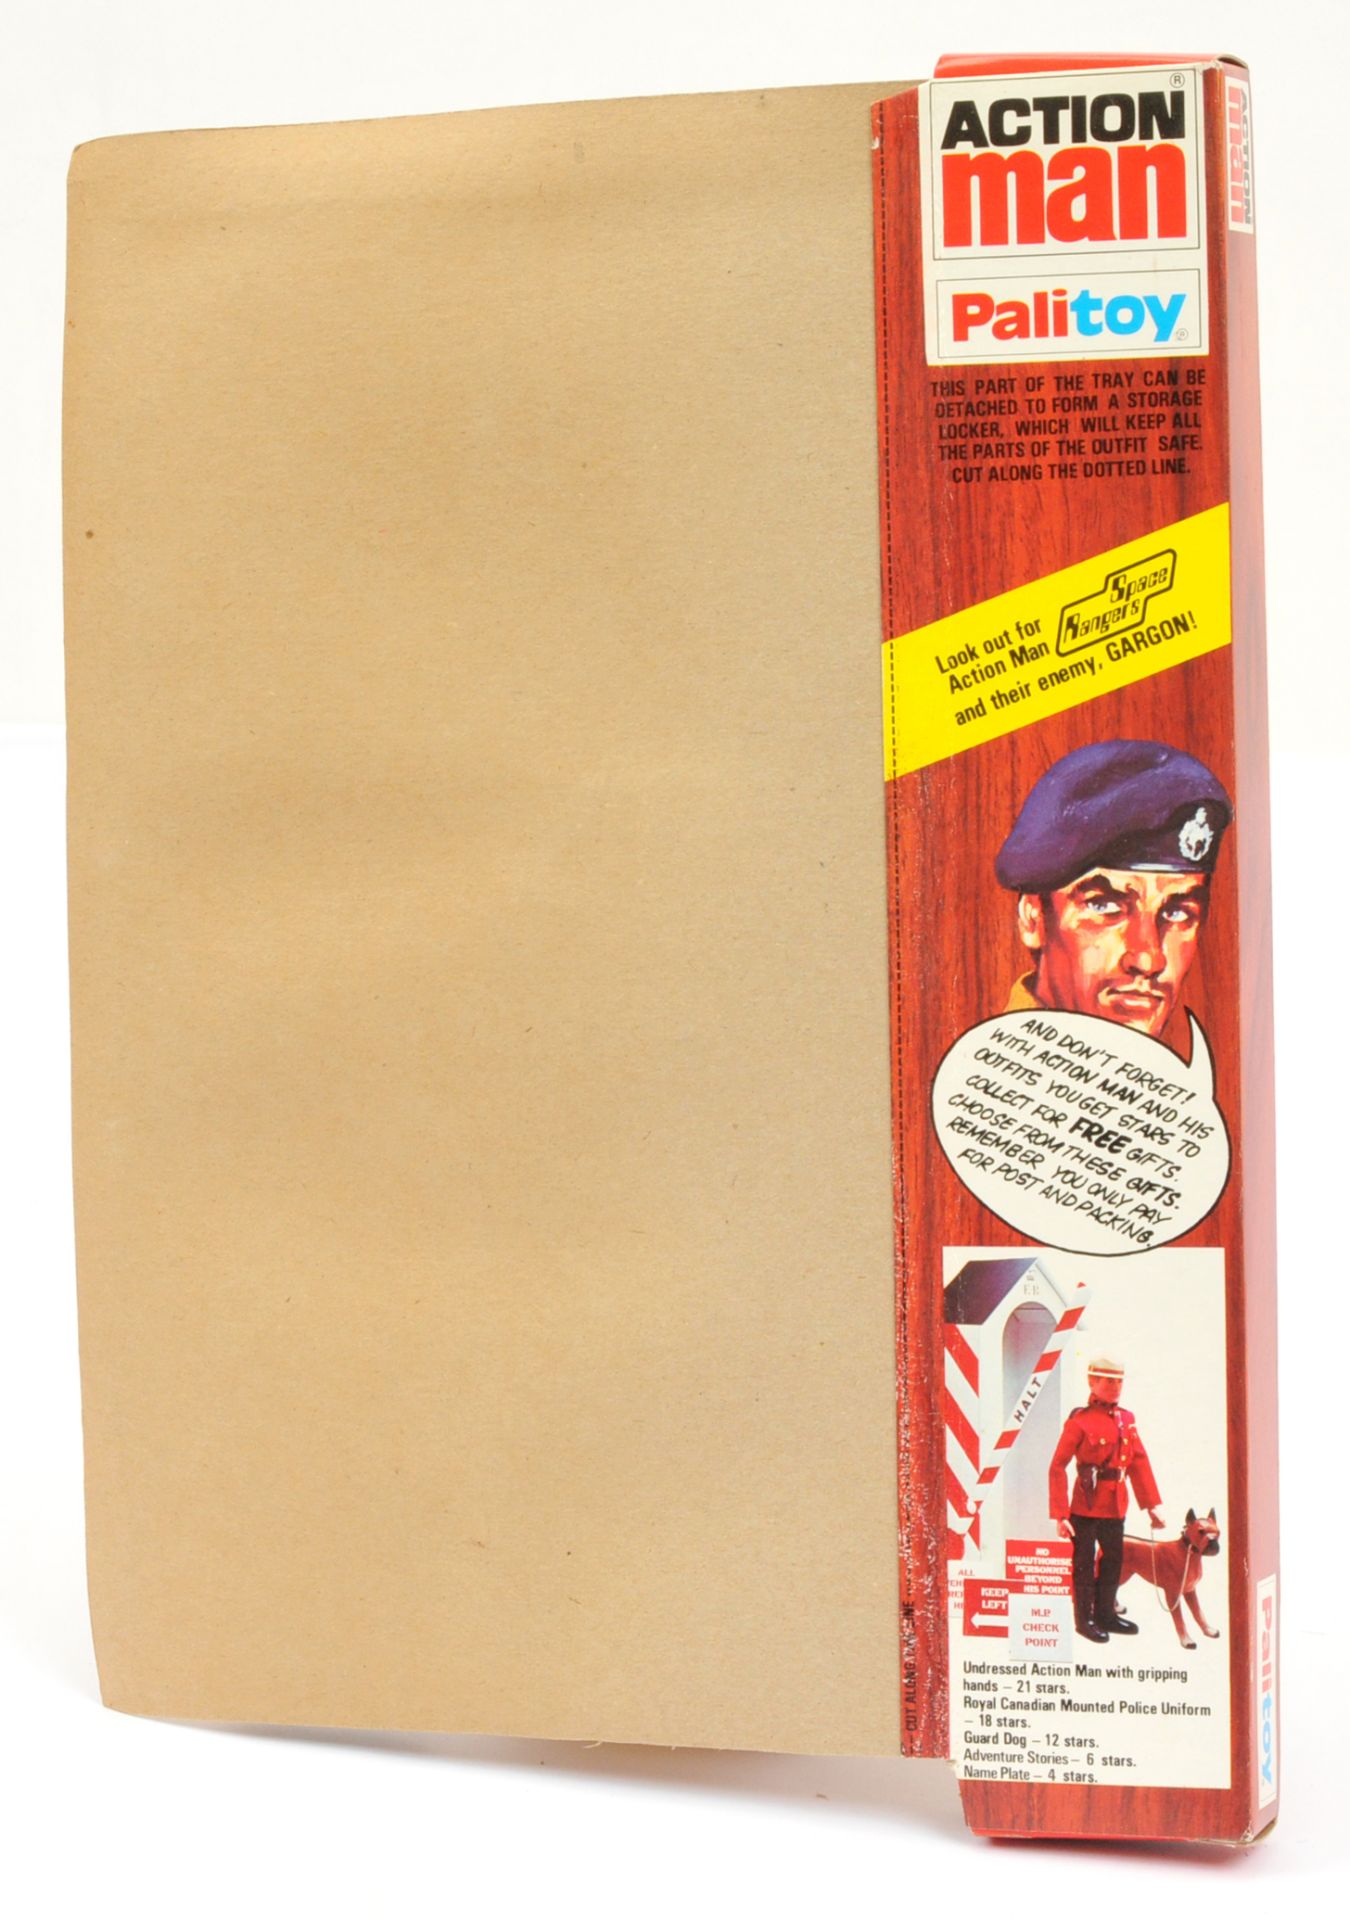 Palitoy Vintage Action Man British Infantryman Locker Box carded outfit, cat No.34317, comprising... - Image 2 of 2